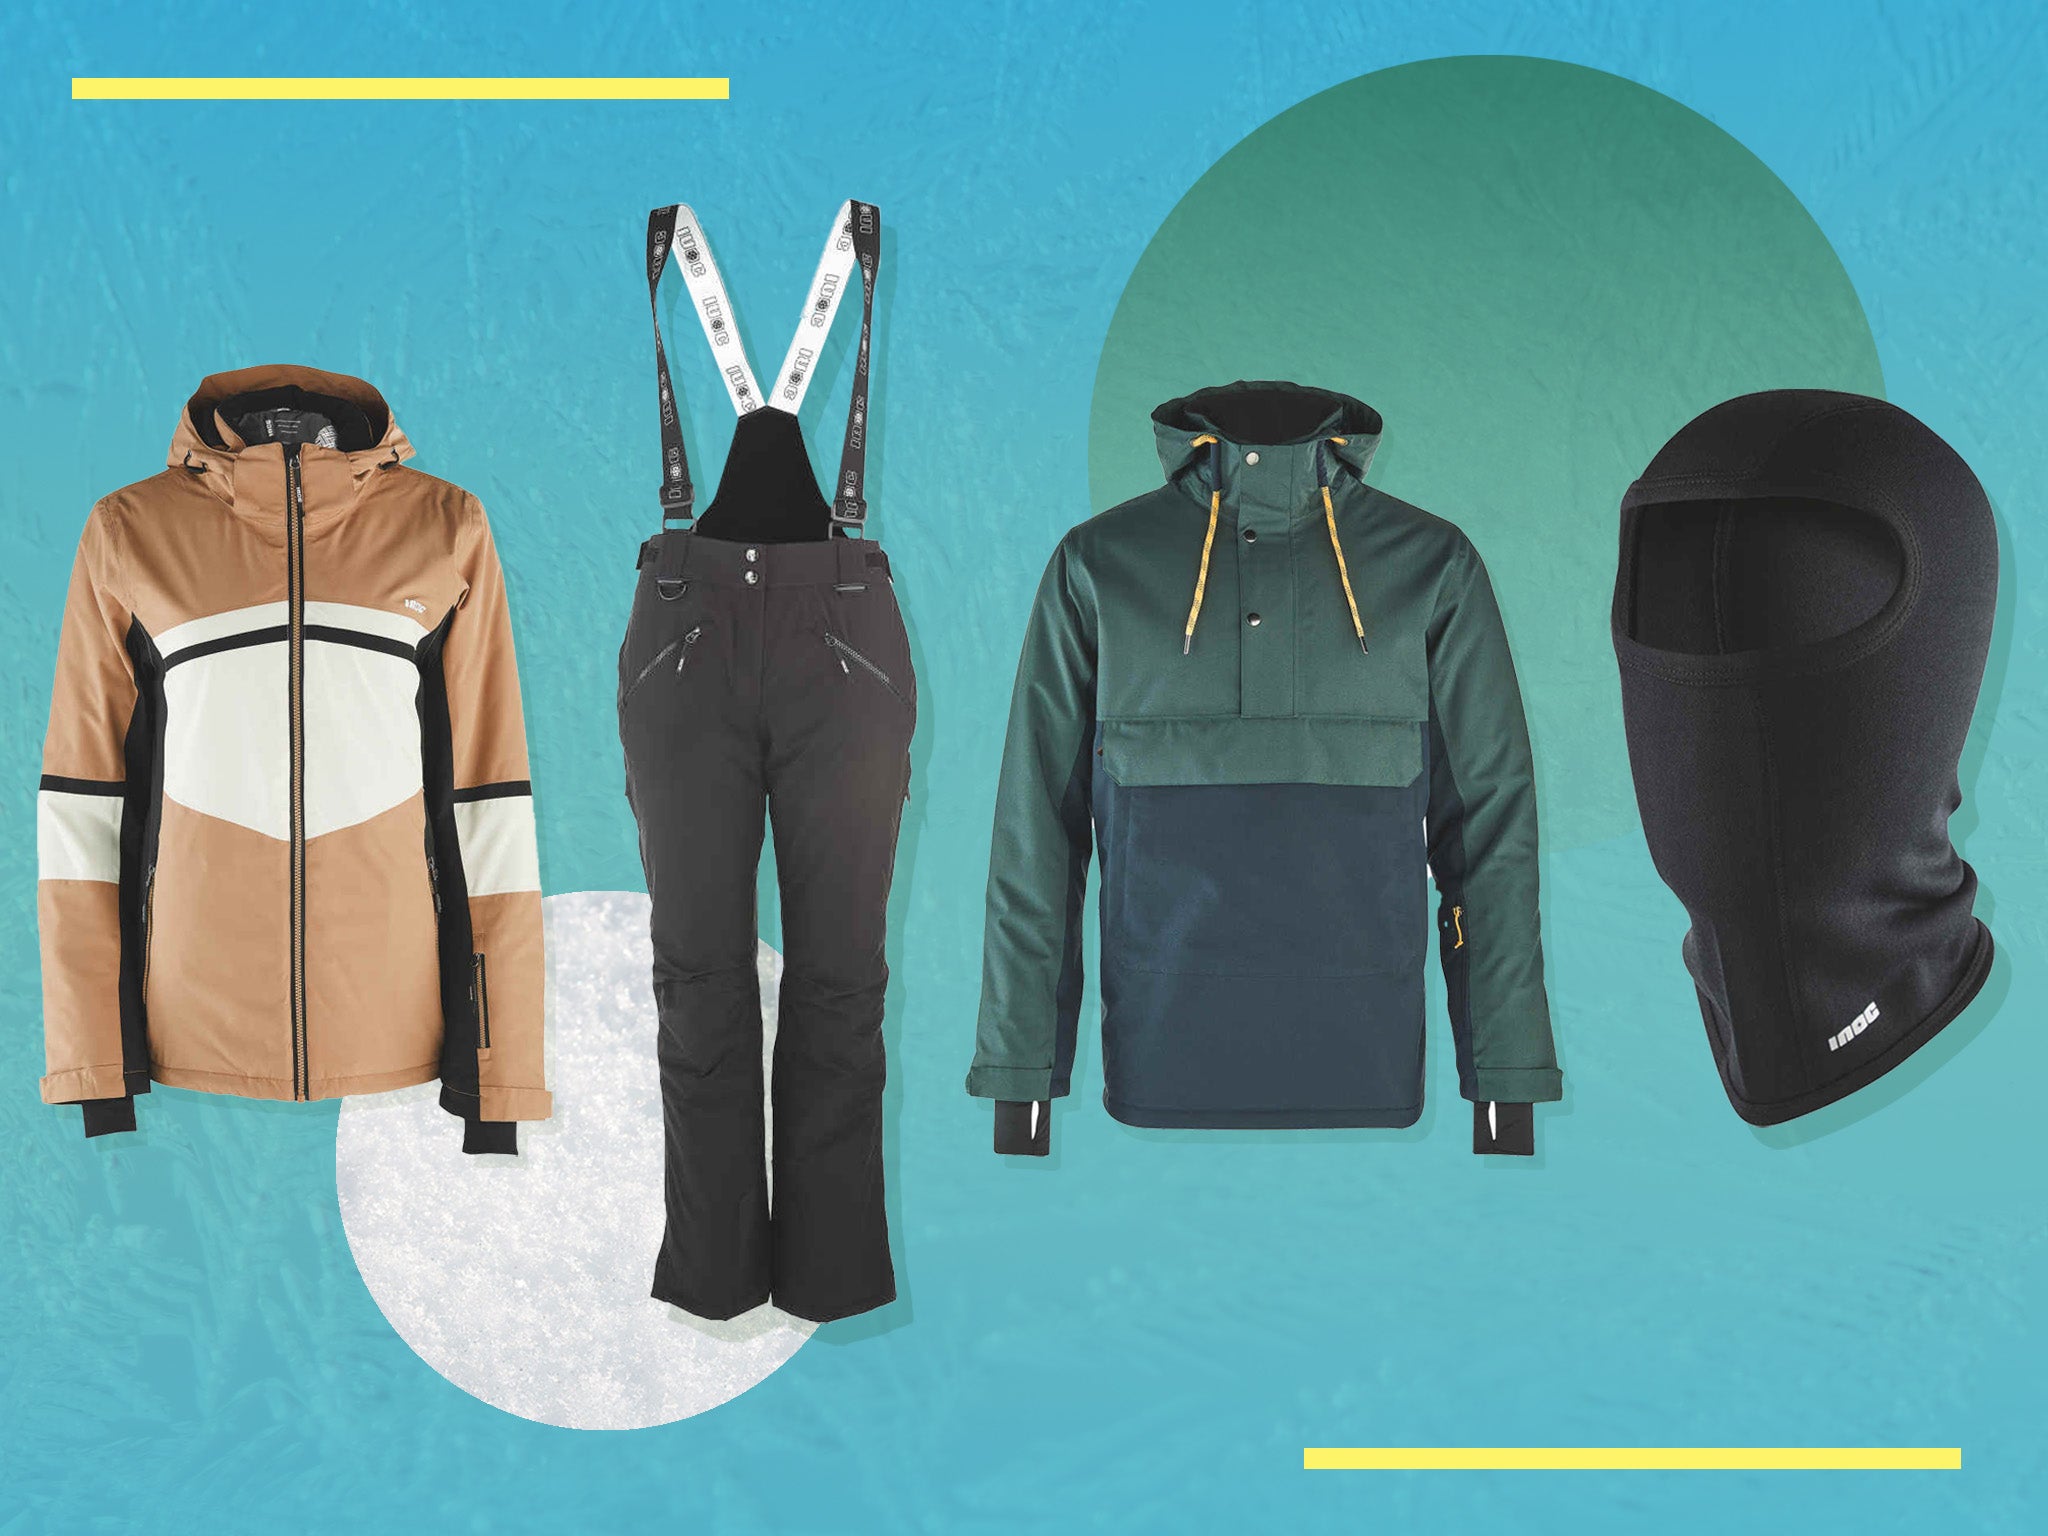 Aldi’s ski wear range has landed to kit you out for the slopes